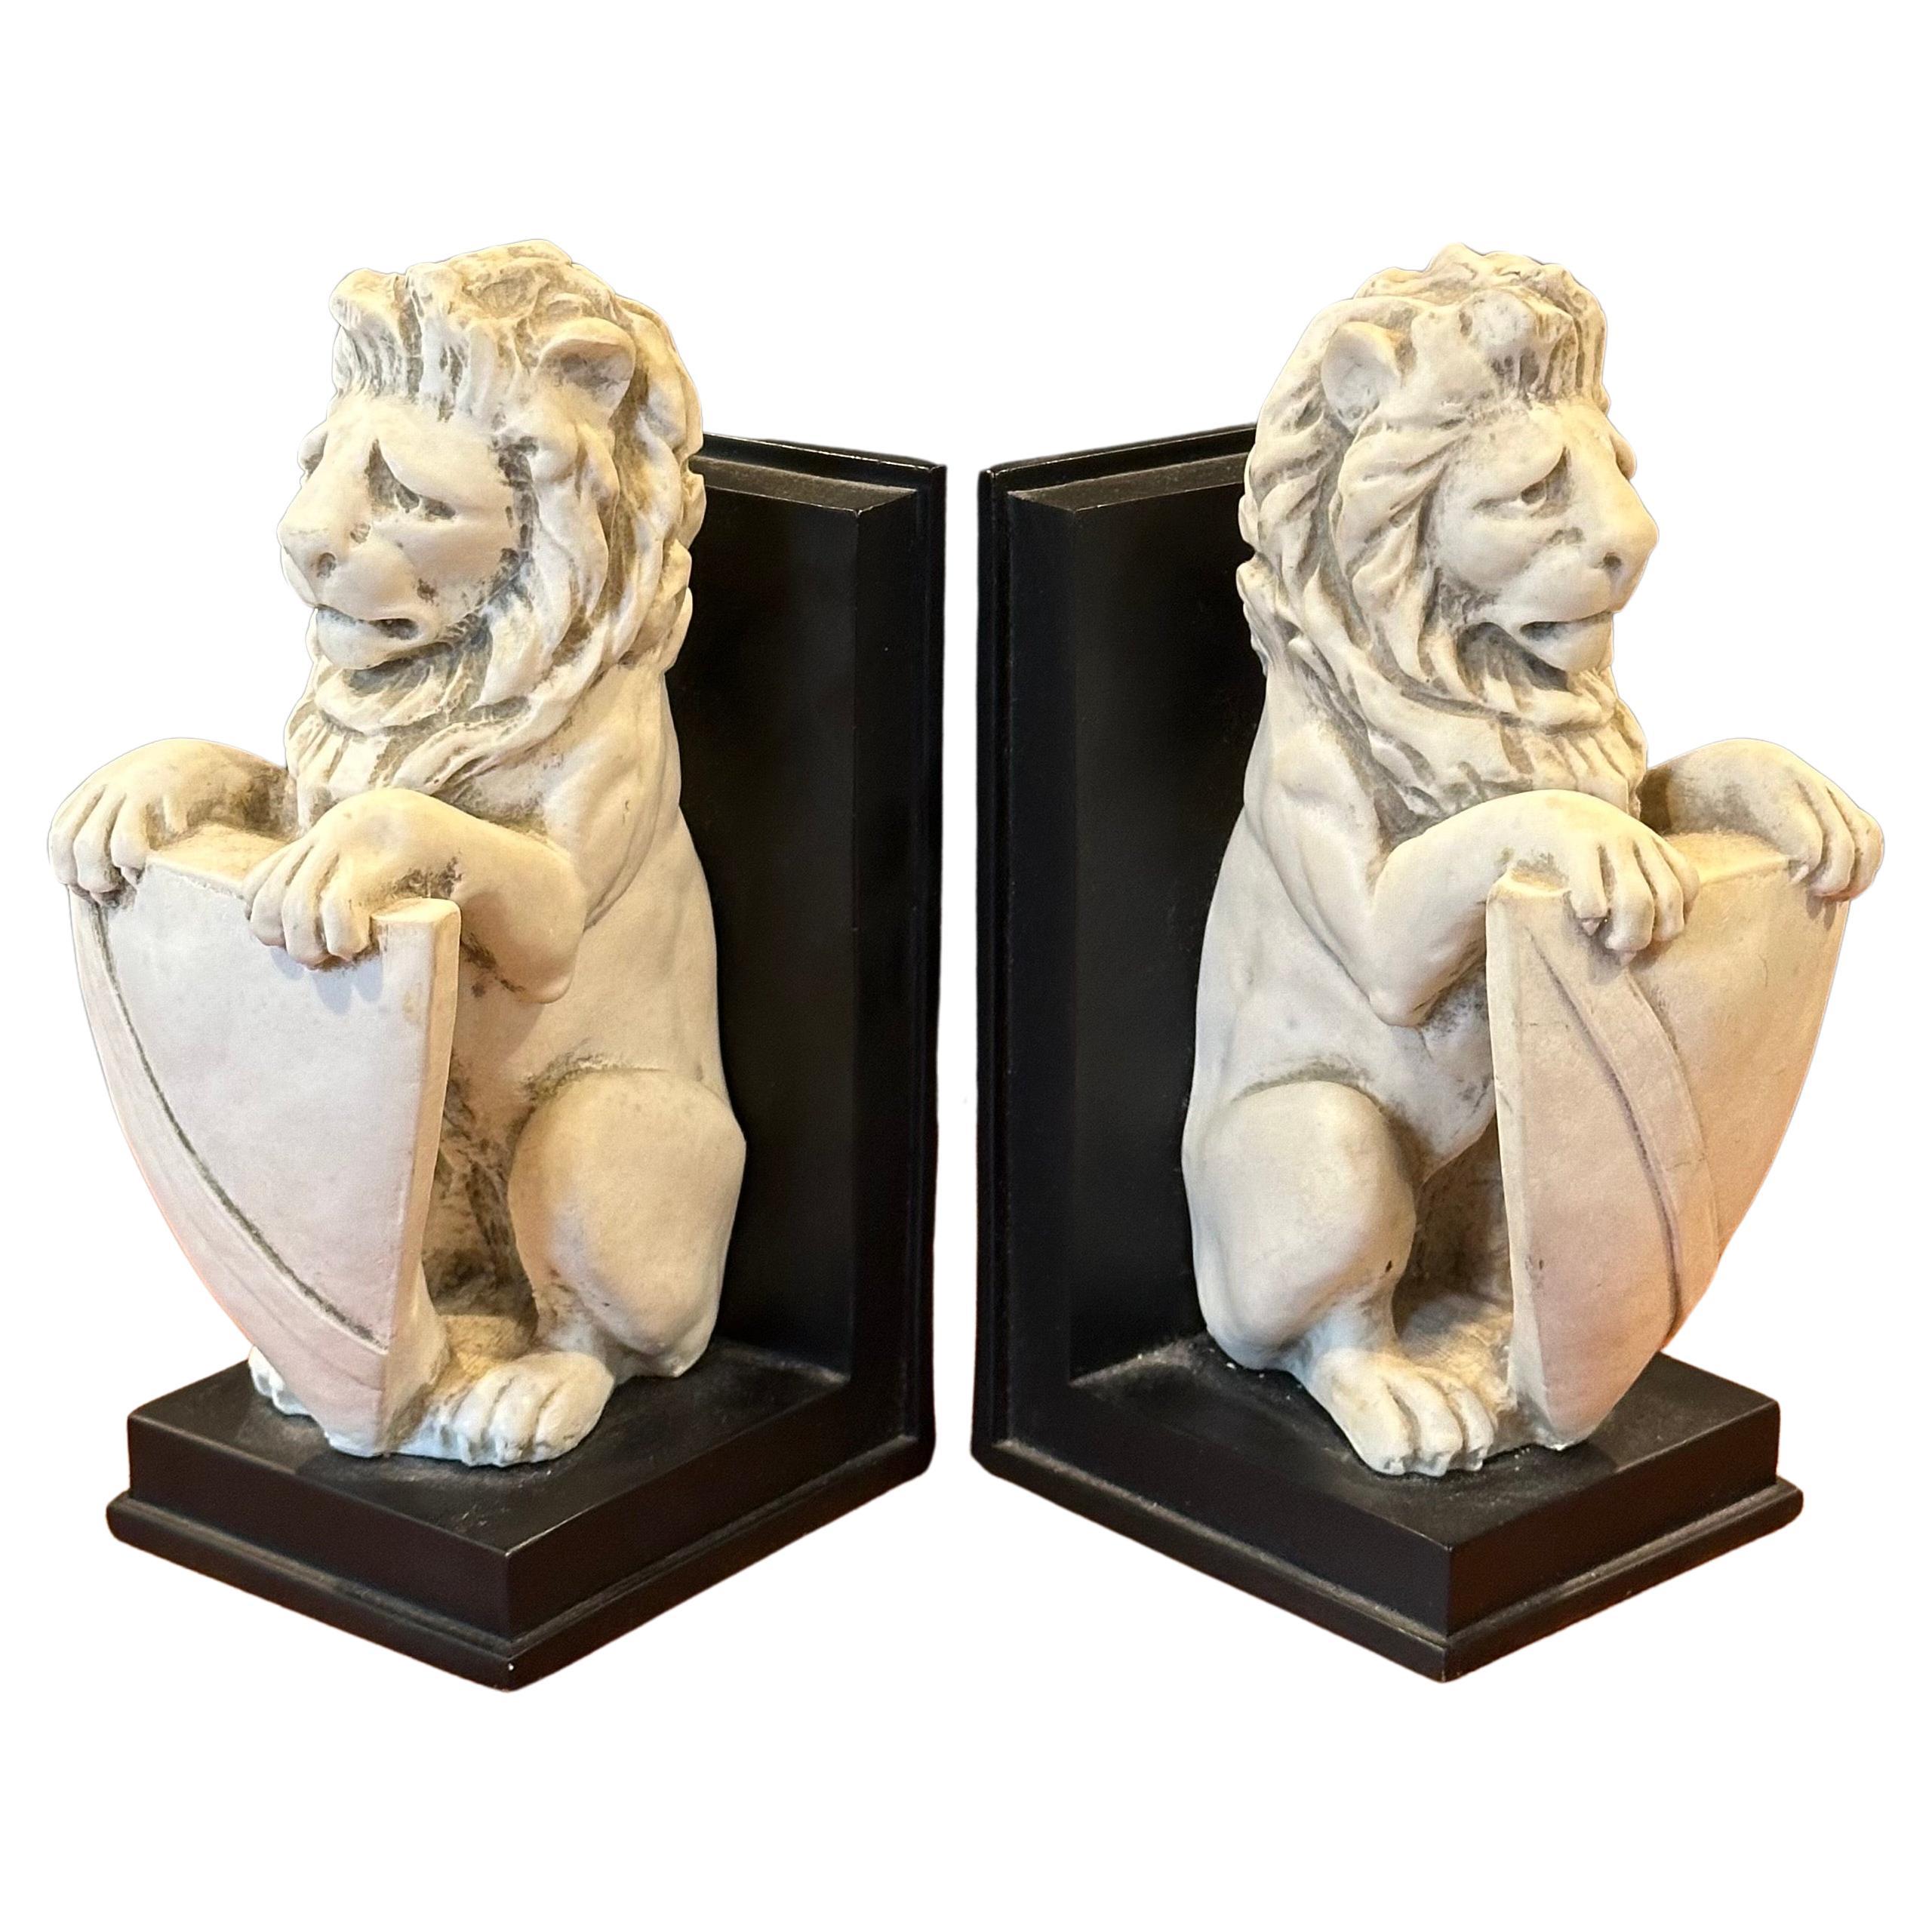 Pair of Lucerne Lion Bookends by HPI